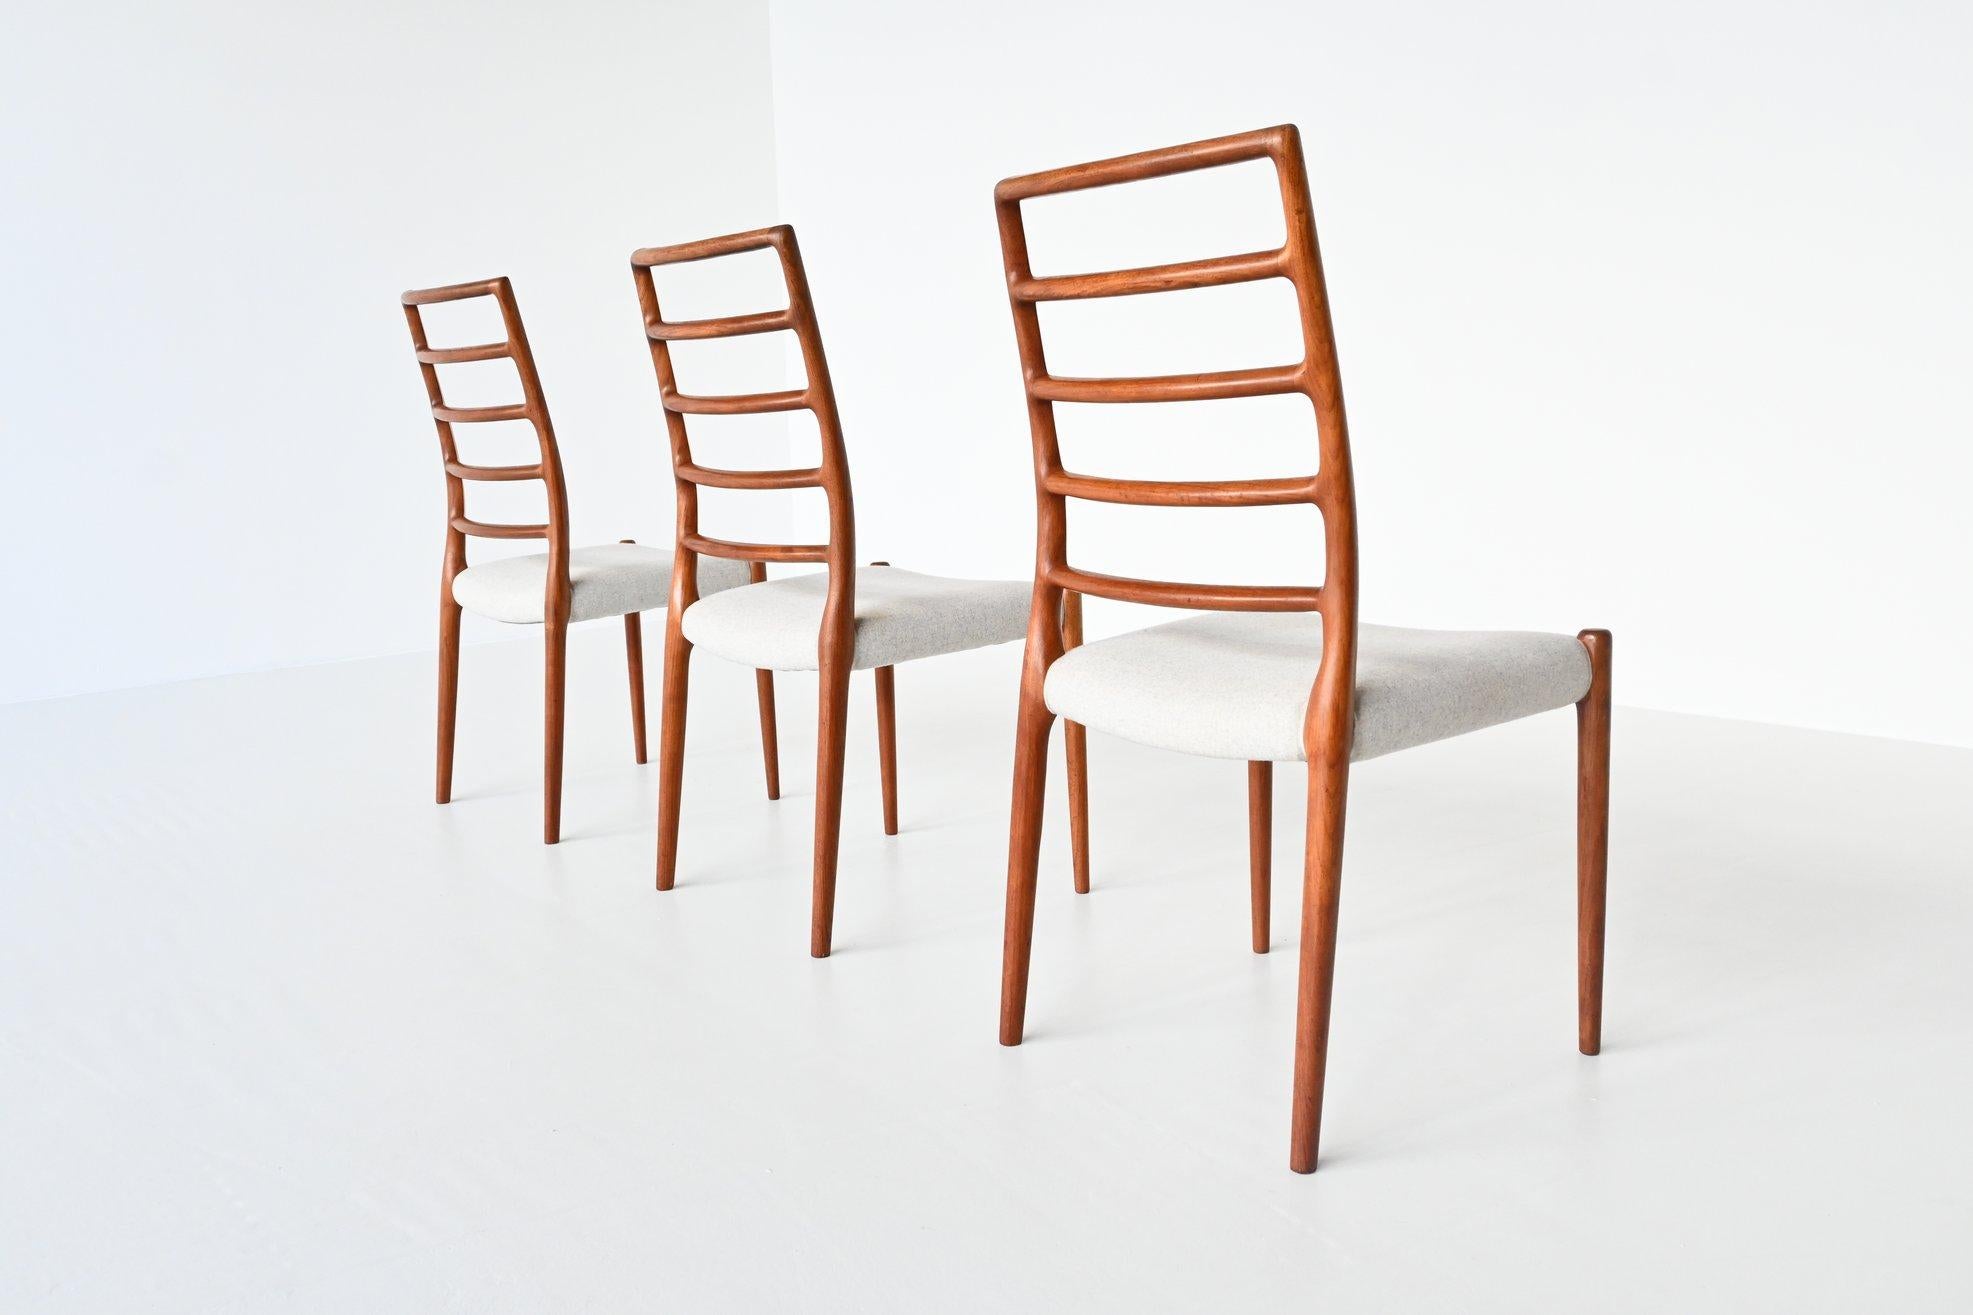 Beautiful set of three dining chairs model 82 designed by Niels Otto Moller and manufactured by J.L. Møller Mobelfabrik, Denmark, 1960. These chairs are made of solid teak wood and are upholstered with cream white Divina Melange fabric of Kvadrat.